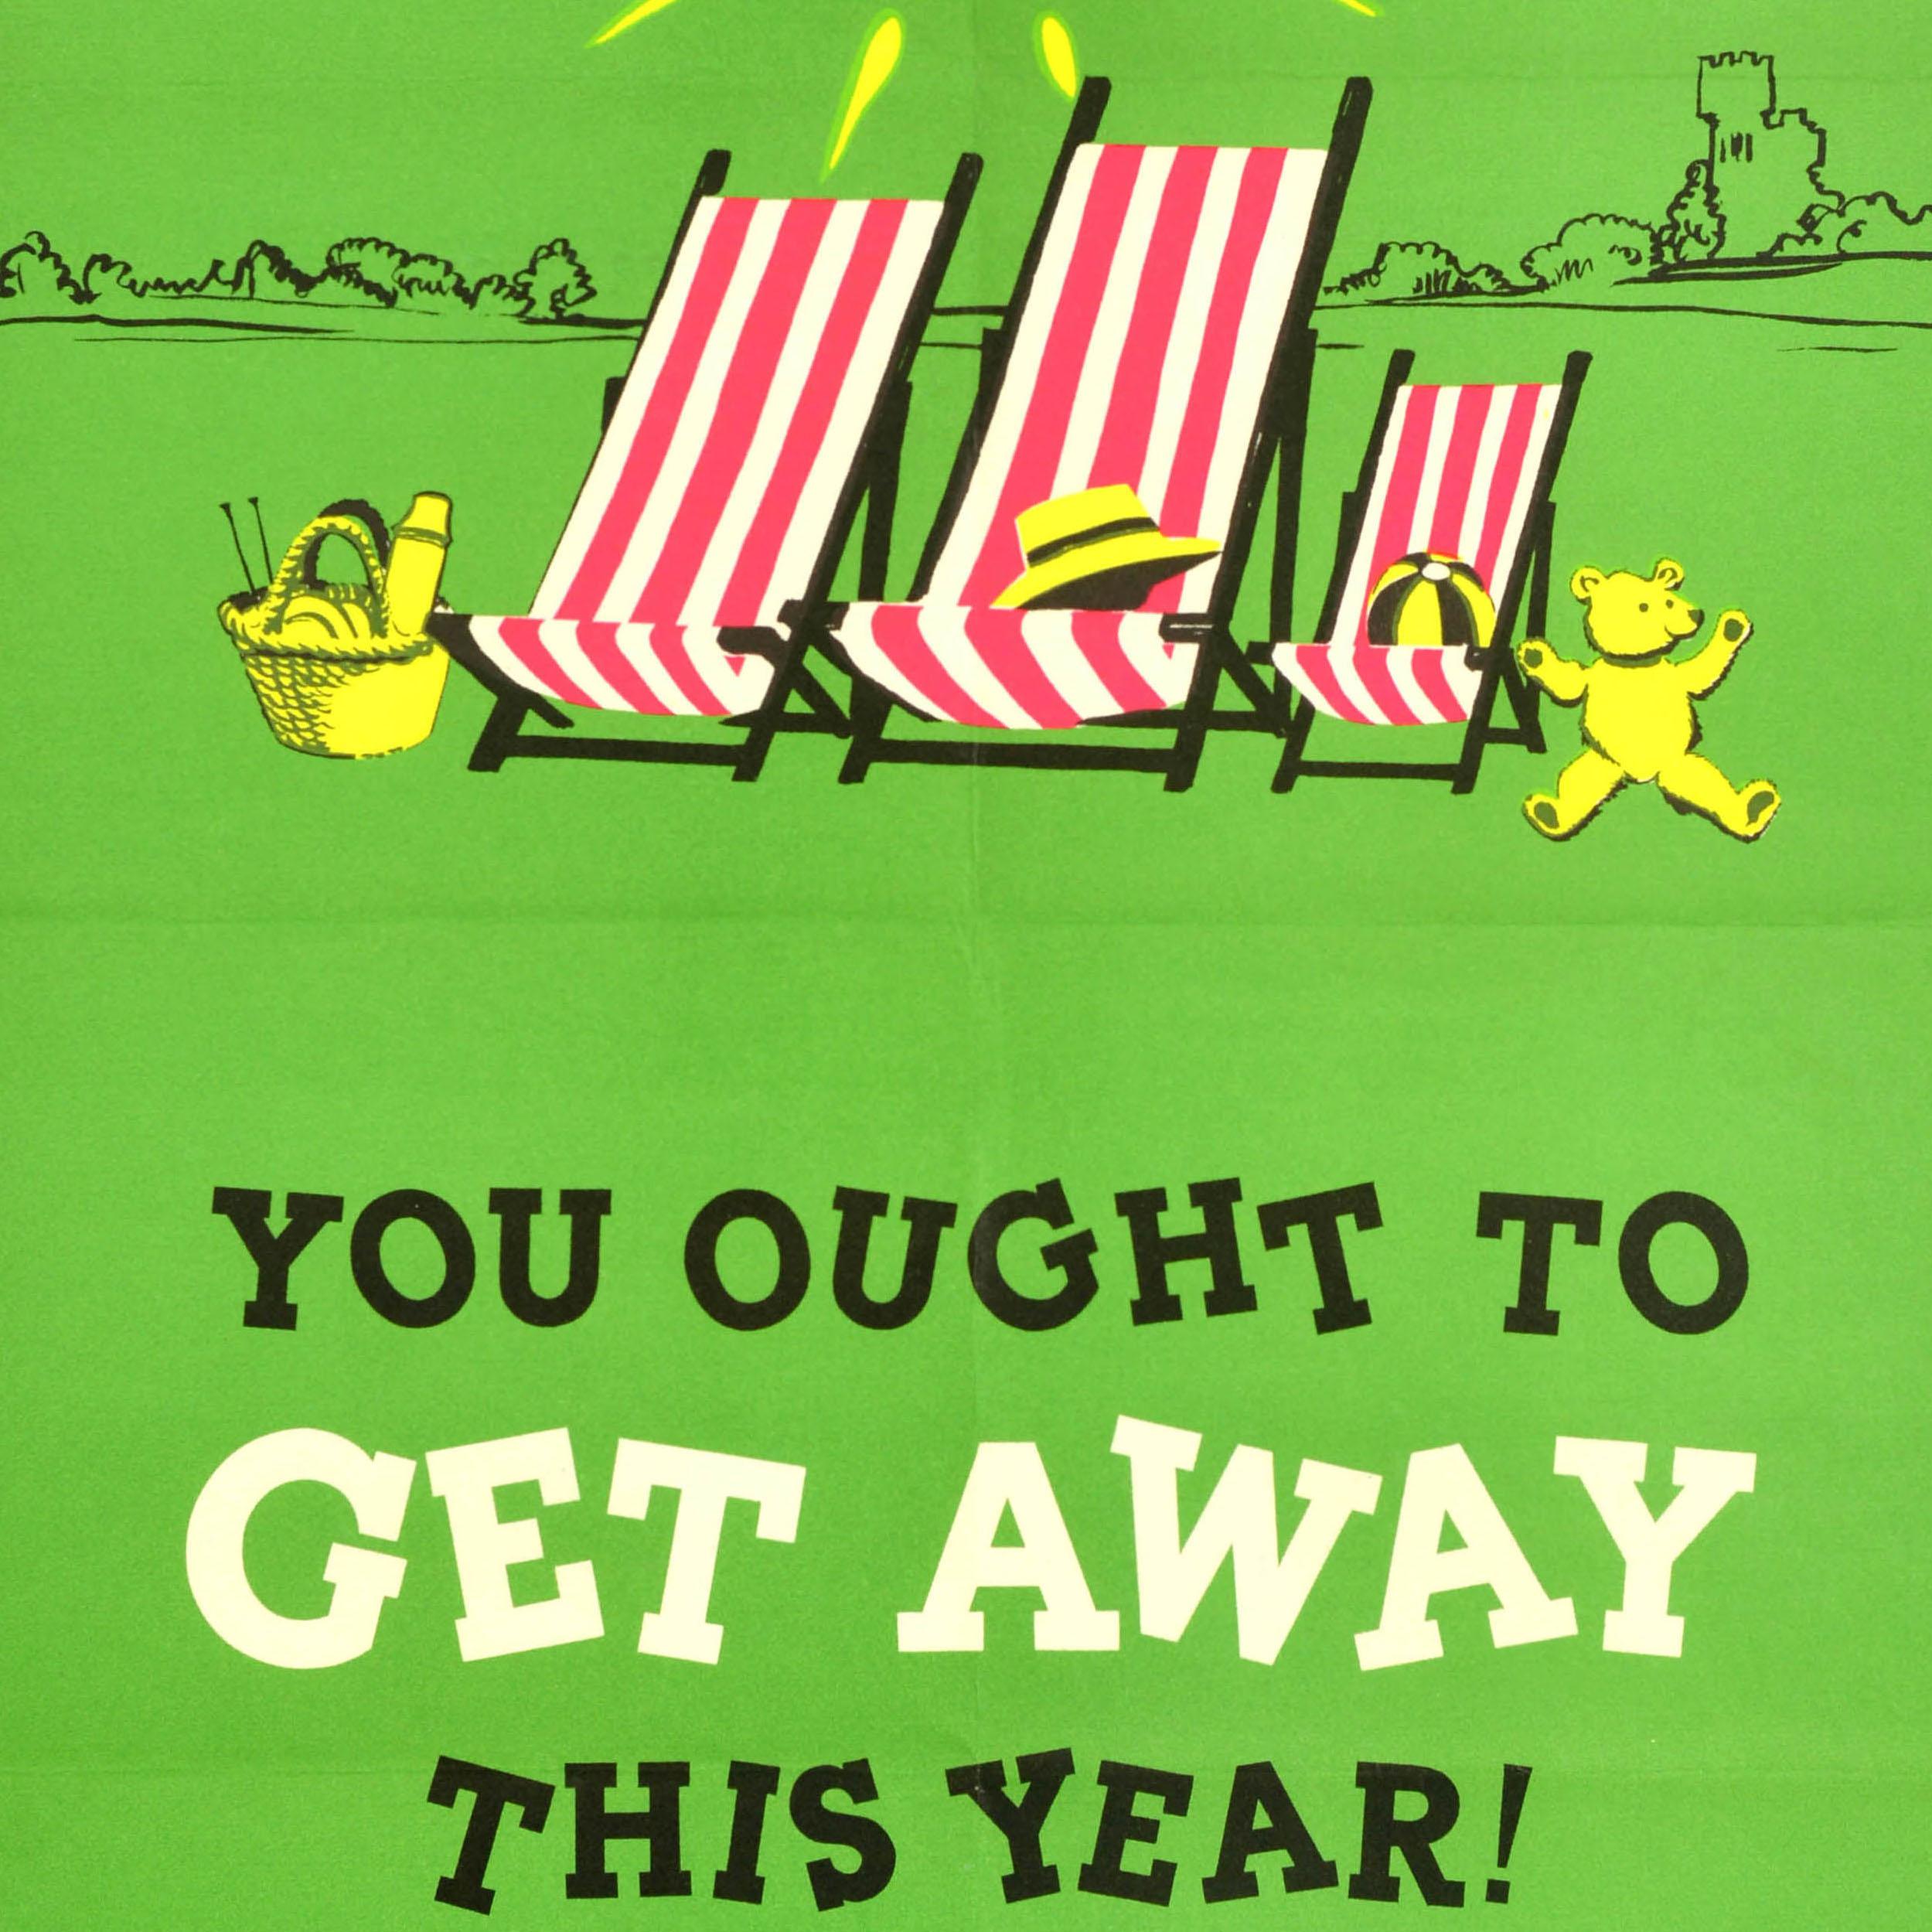 Original vintage travel poster promoting Holidays in Britain You ought to get away this year! It's better remember in June or September featuring a fun illustration of red and white striped deck chairs on a beach with a picnic basket, teddy bear,